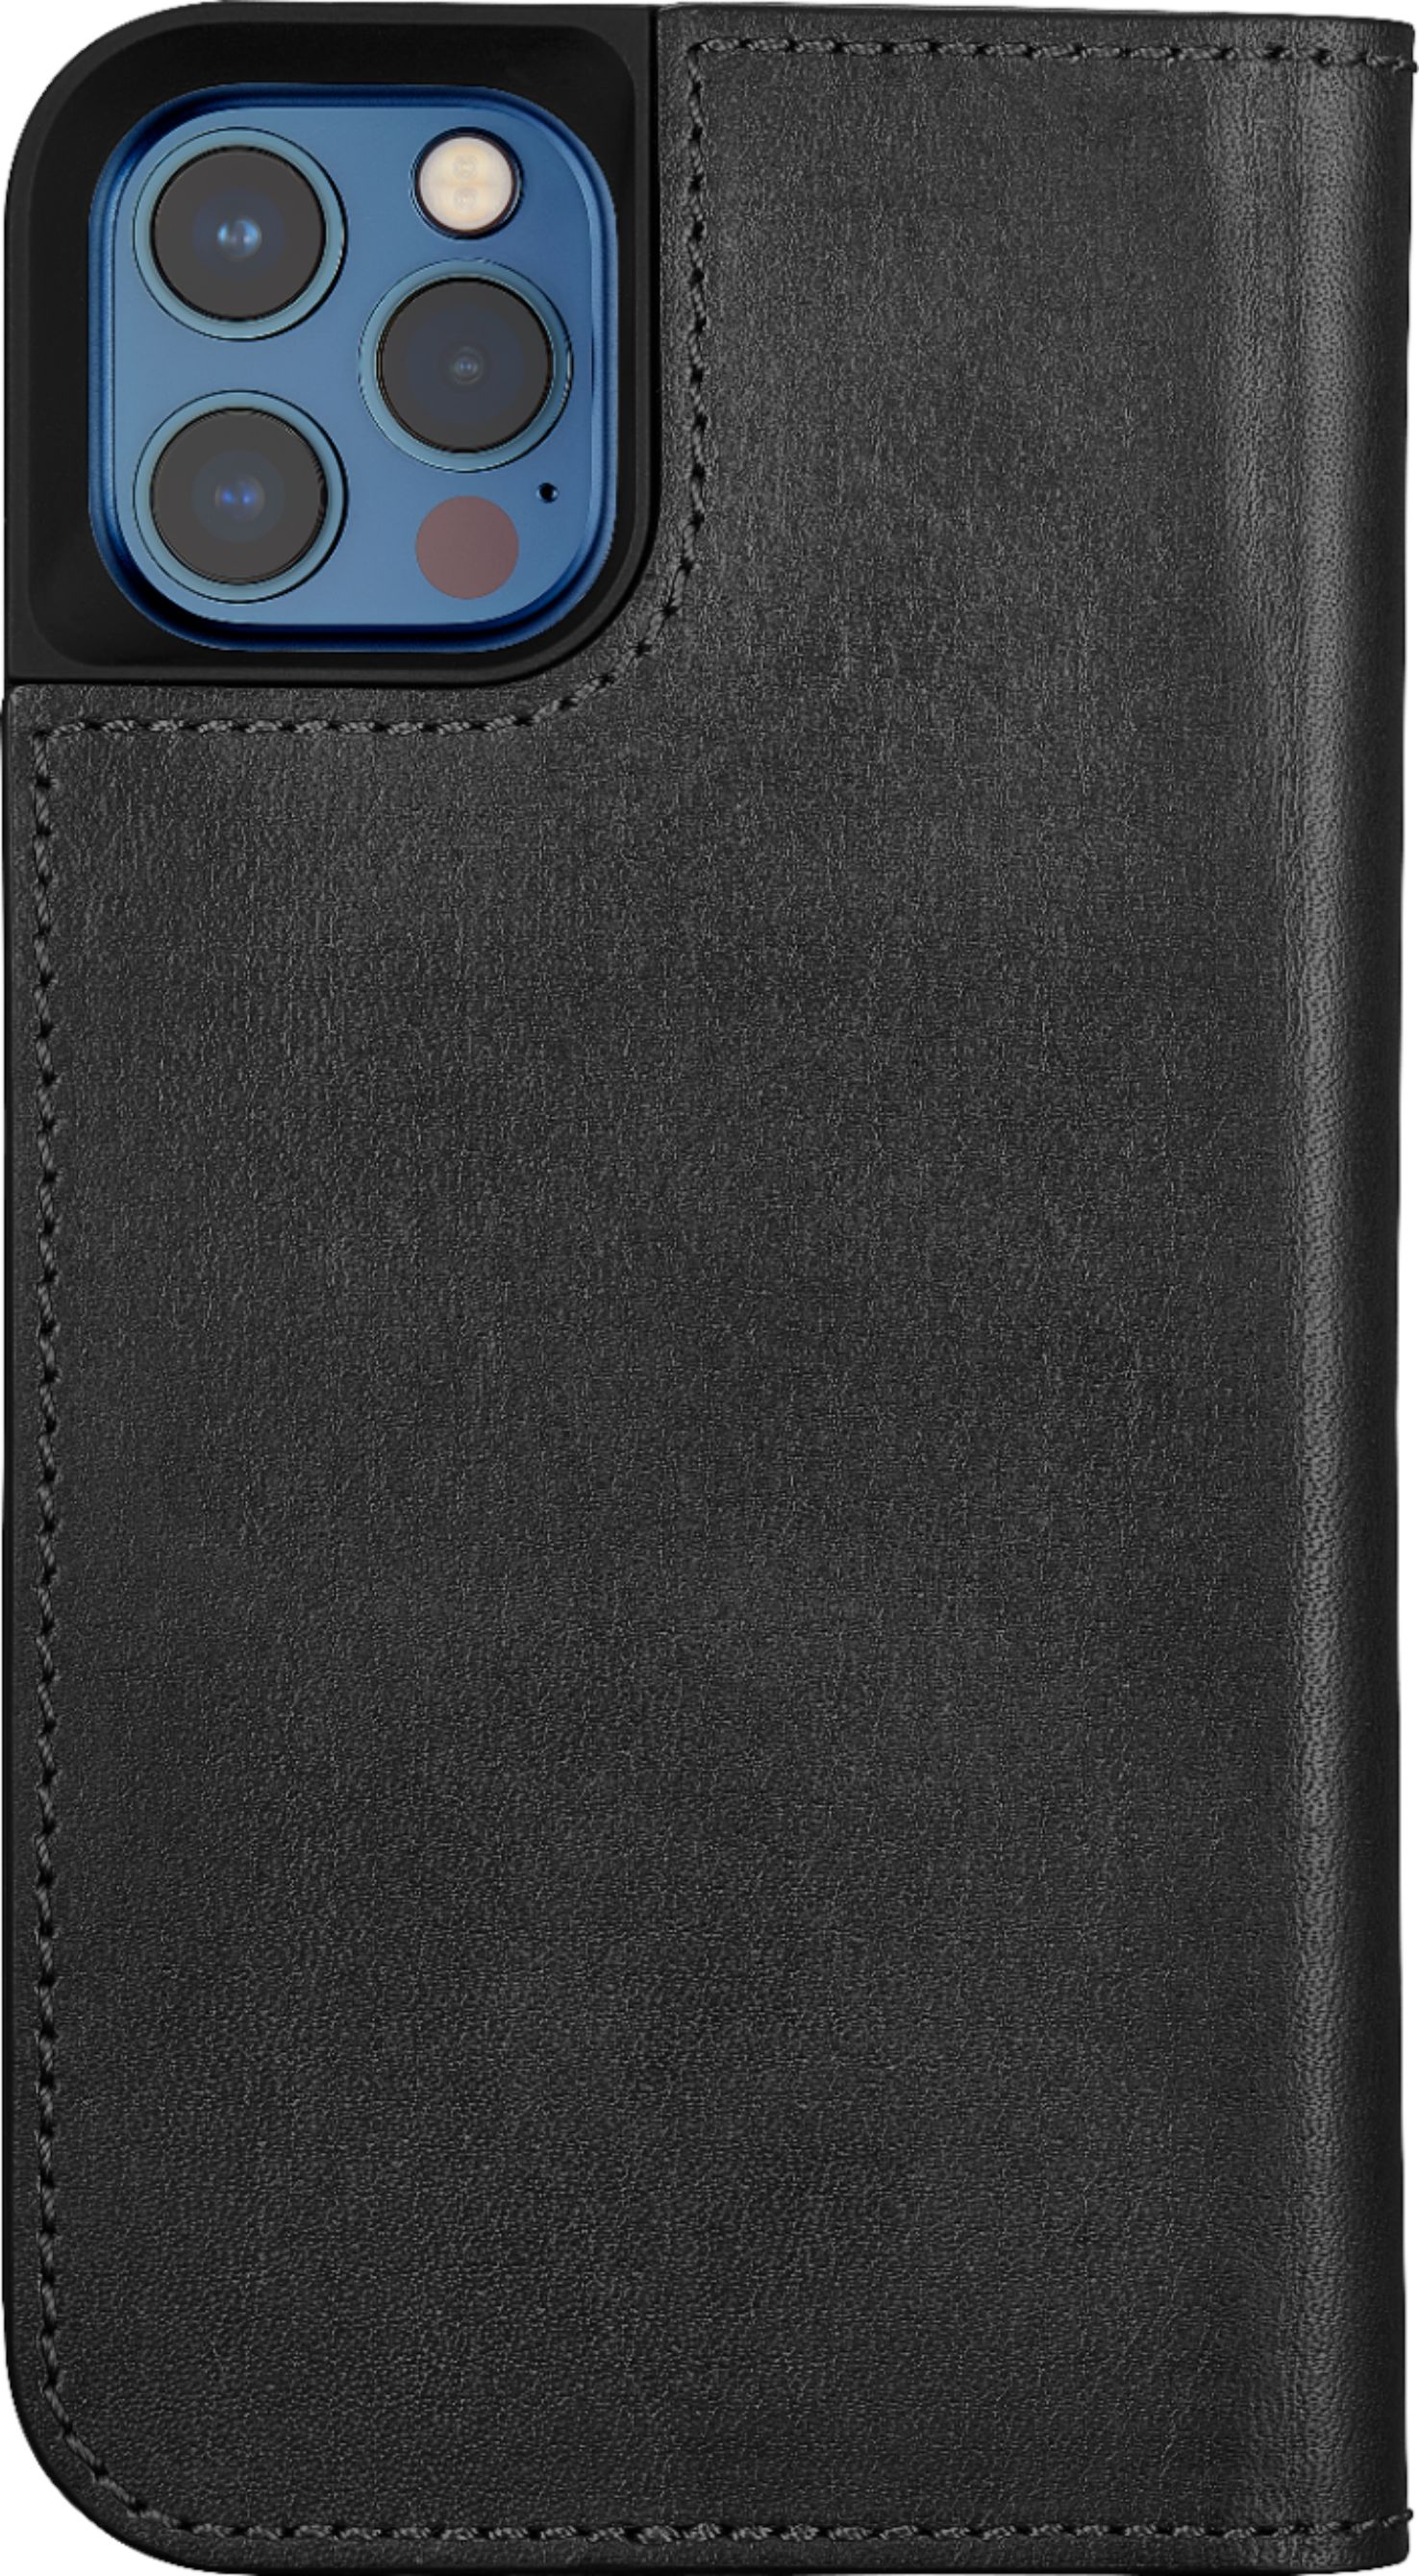 Case-Mate - Tough Leather Wallet Folio - Case for iPhone 12 and iPhone 12  Pro (5G) - Holds 4 Cards + Cash - 6.1 inch - Black